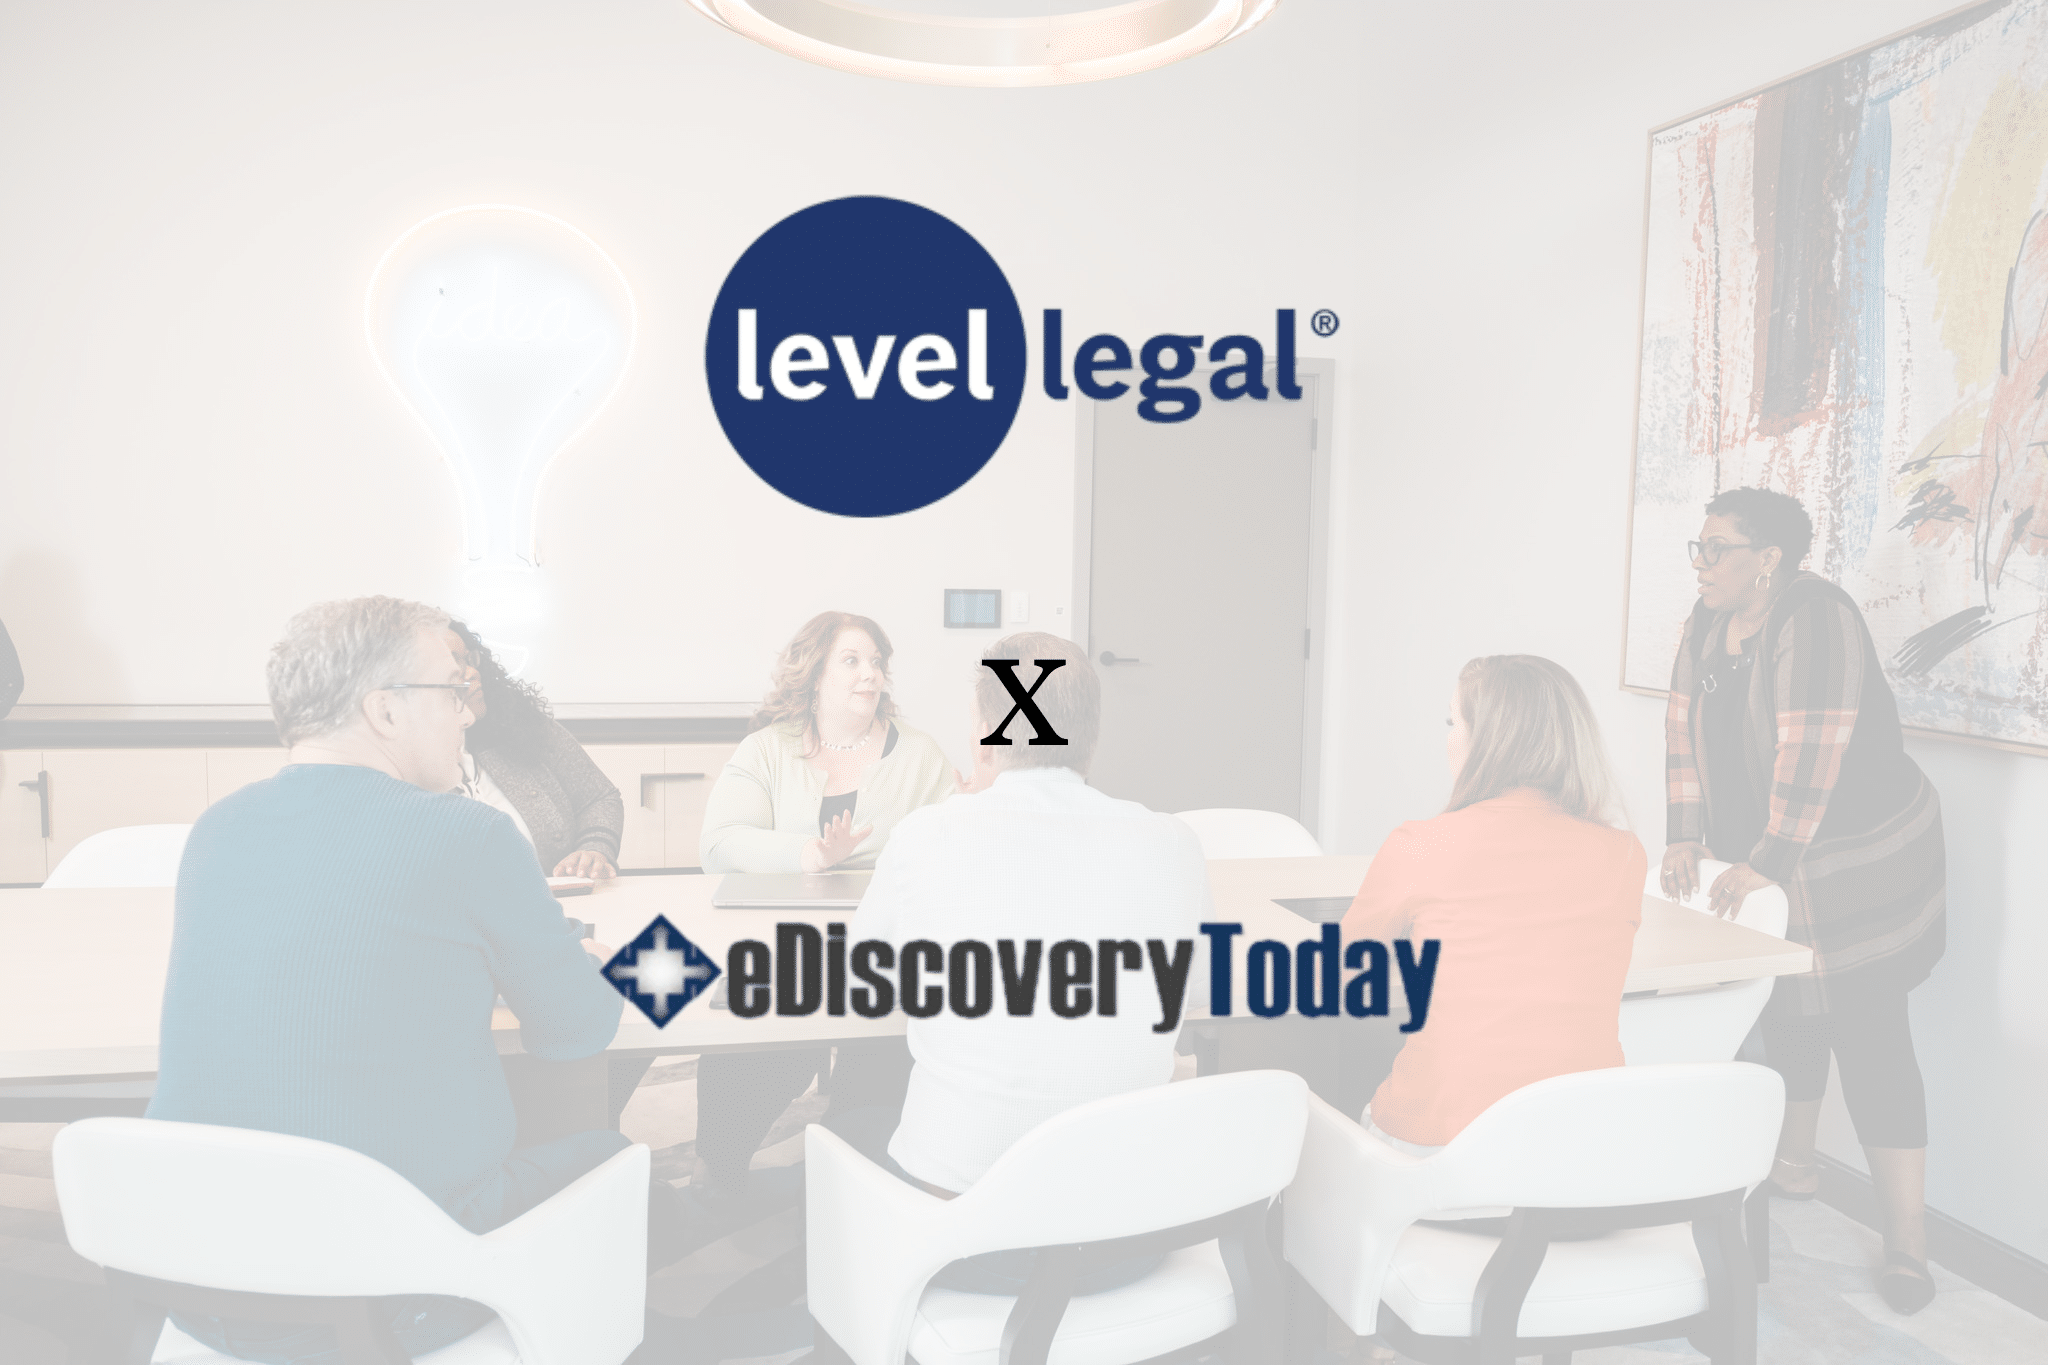 Level Legal Announces Partnership with eDiscovery Today